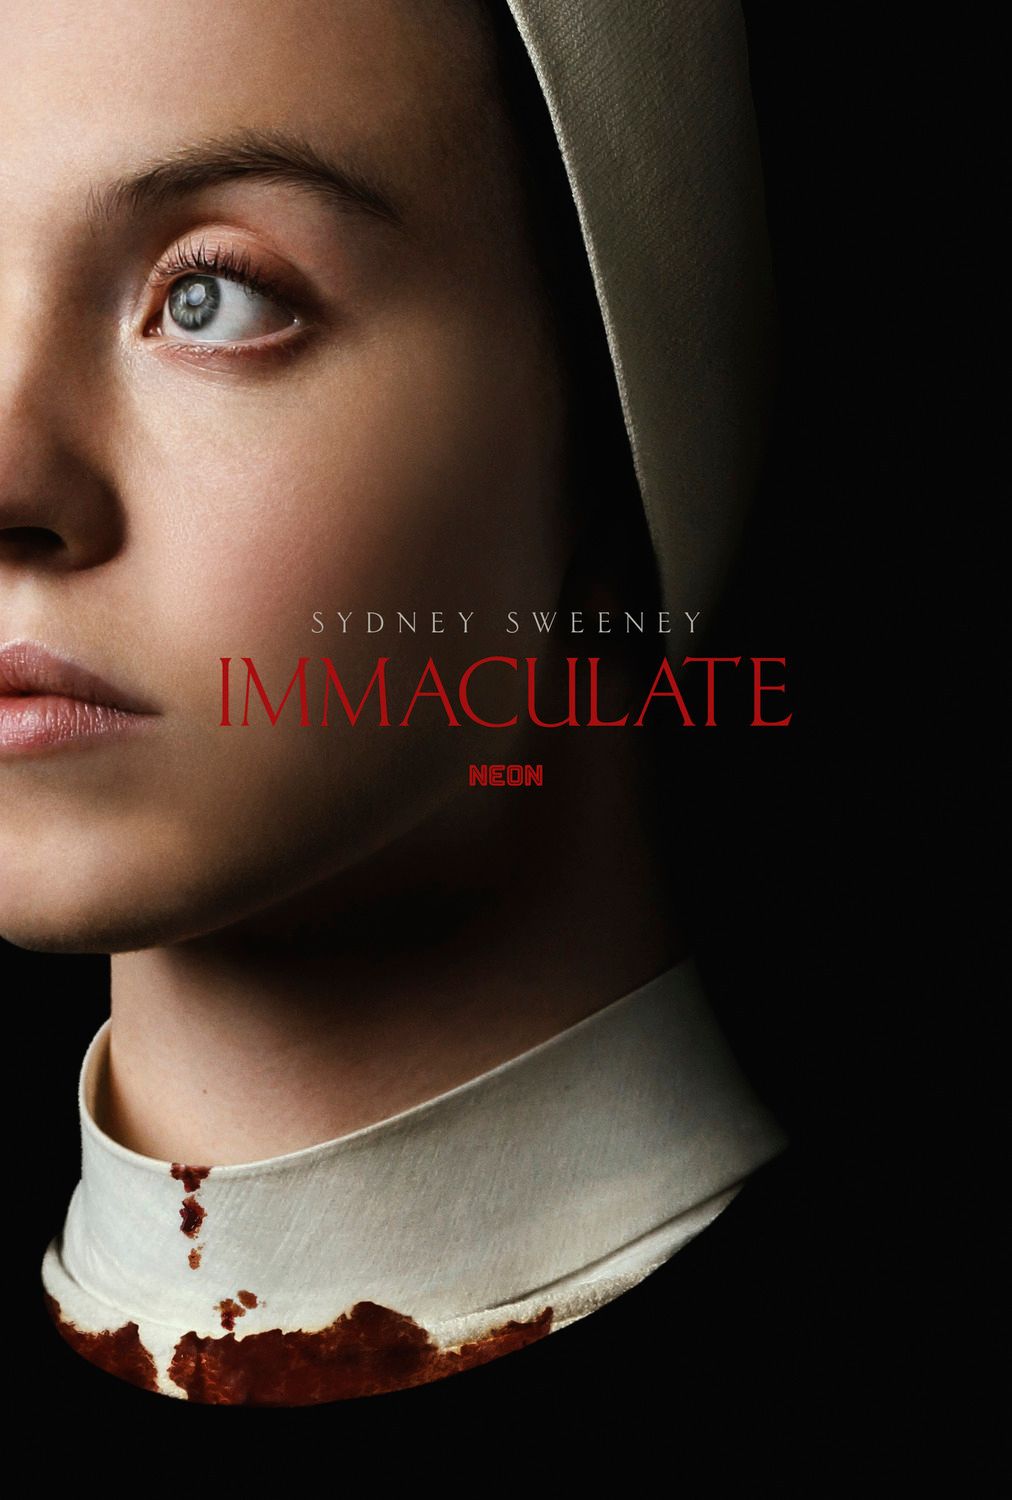 Immaculate Director Agrees with Big Complaint About Sydney Sweeney ...